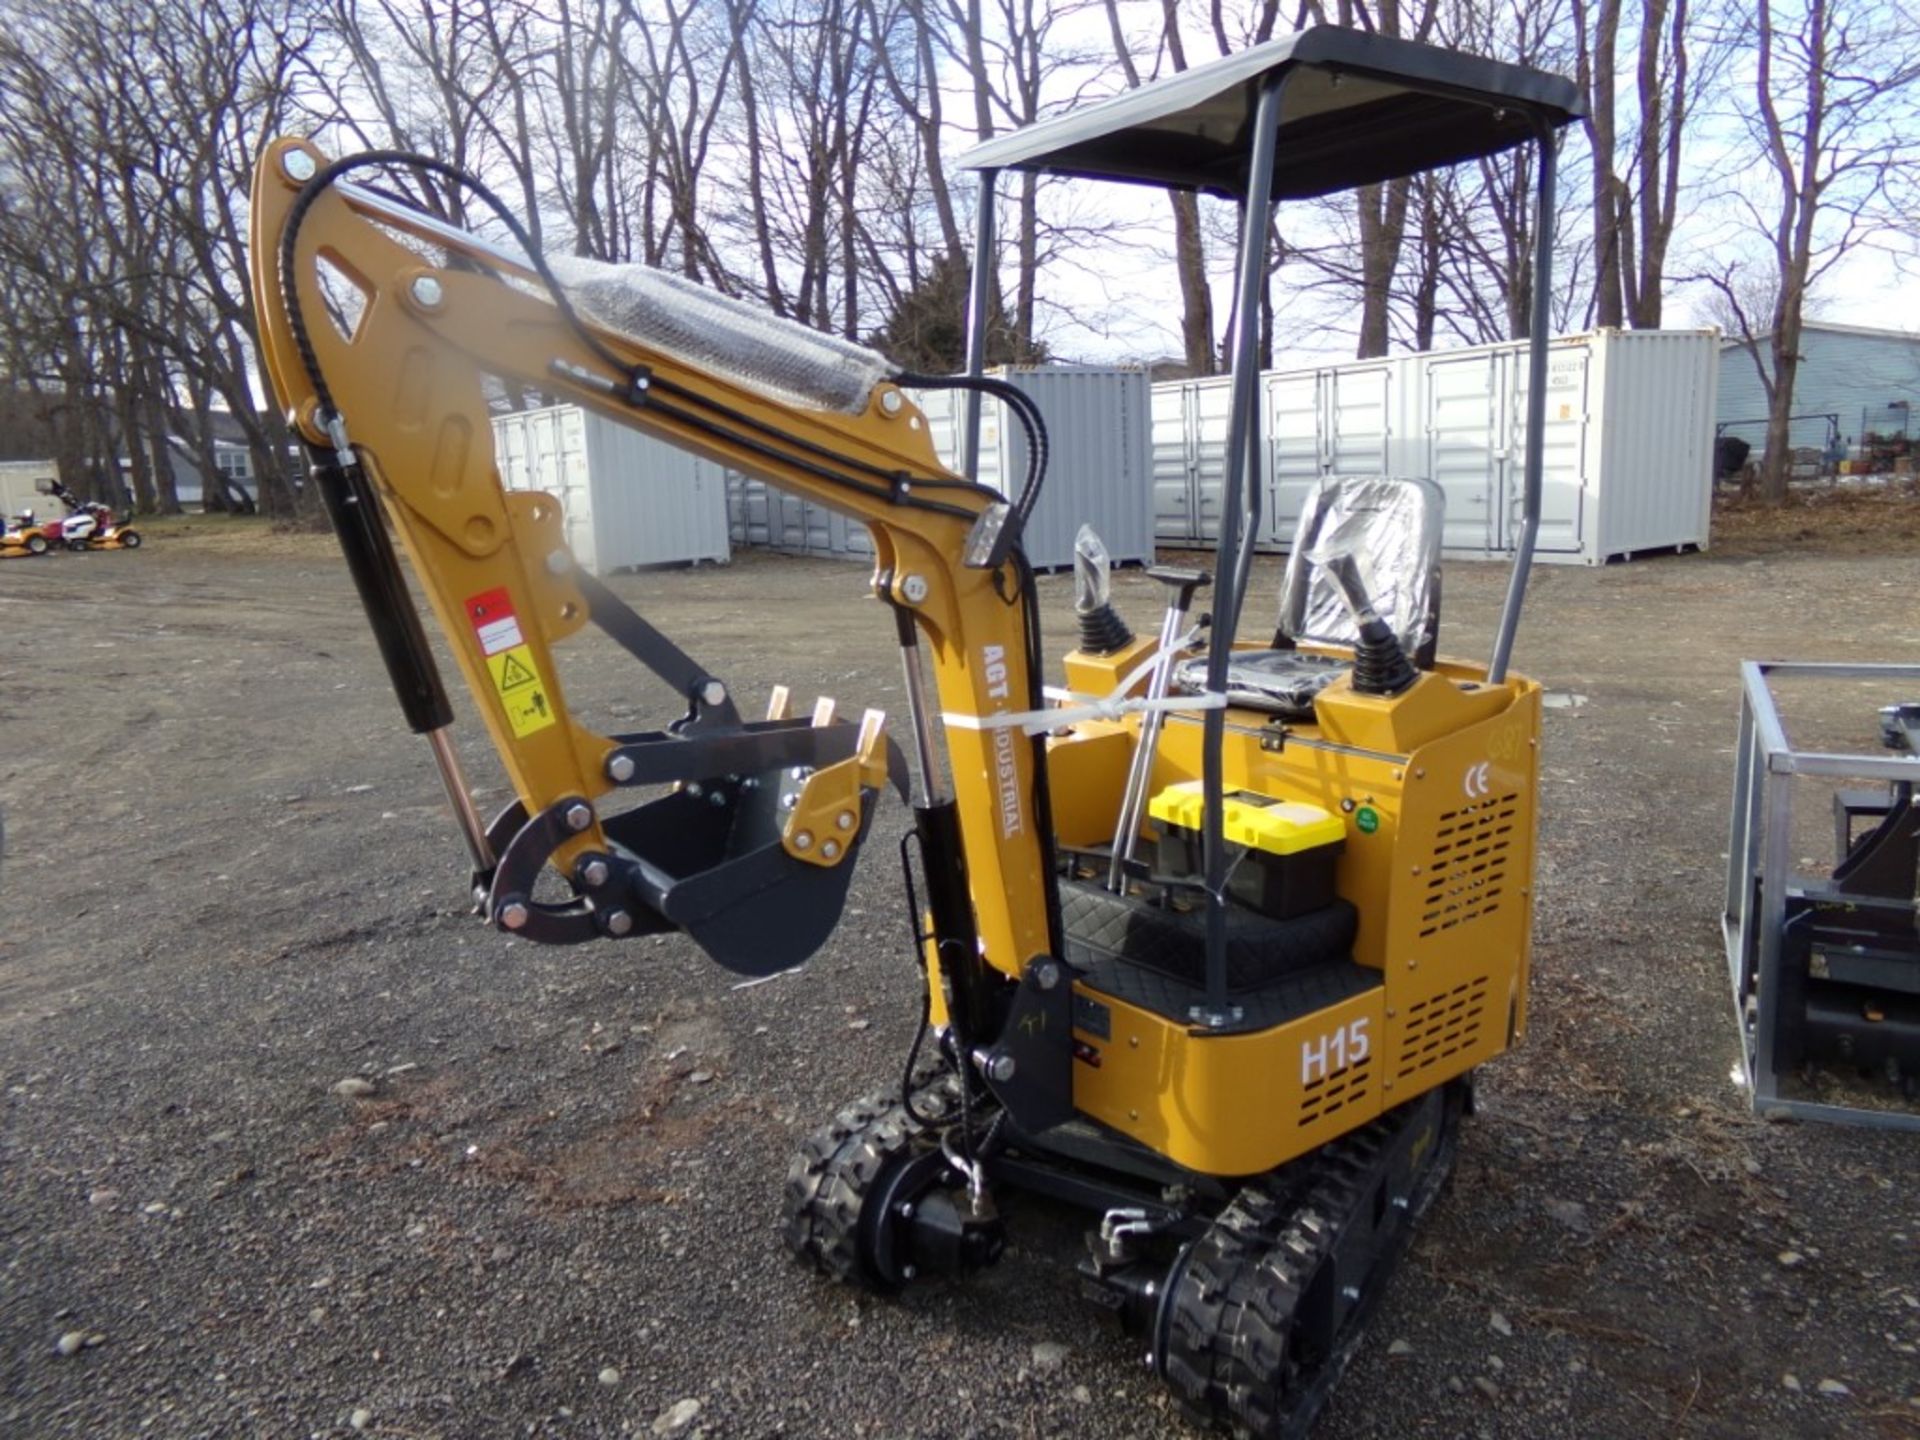 New AGT Industrial H15 Mini Excavator Canopy, Stationary Thumb, Grader Blade, Gas Engine, Industrial